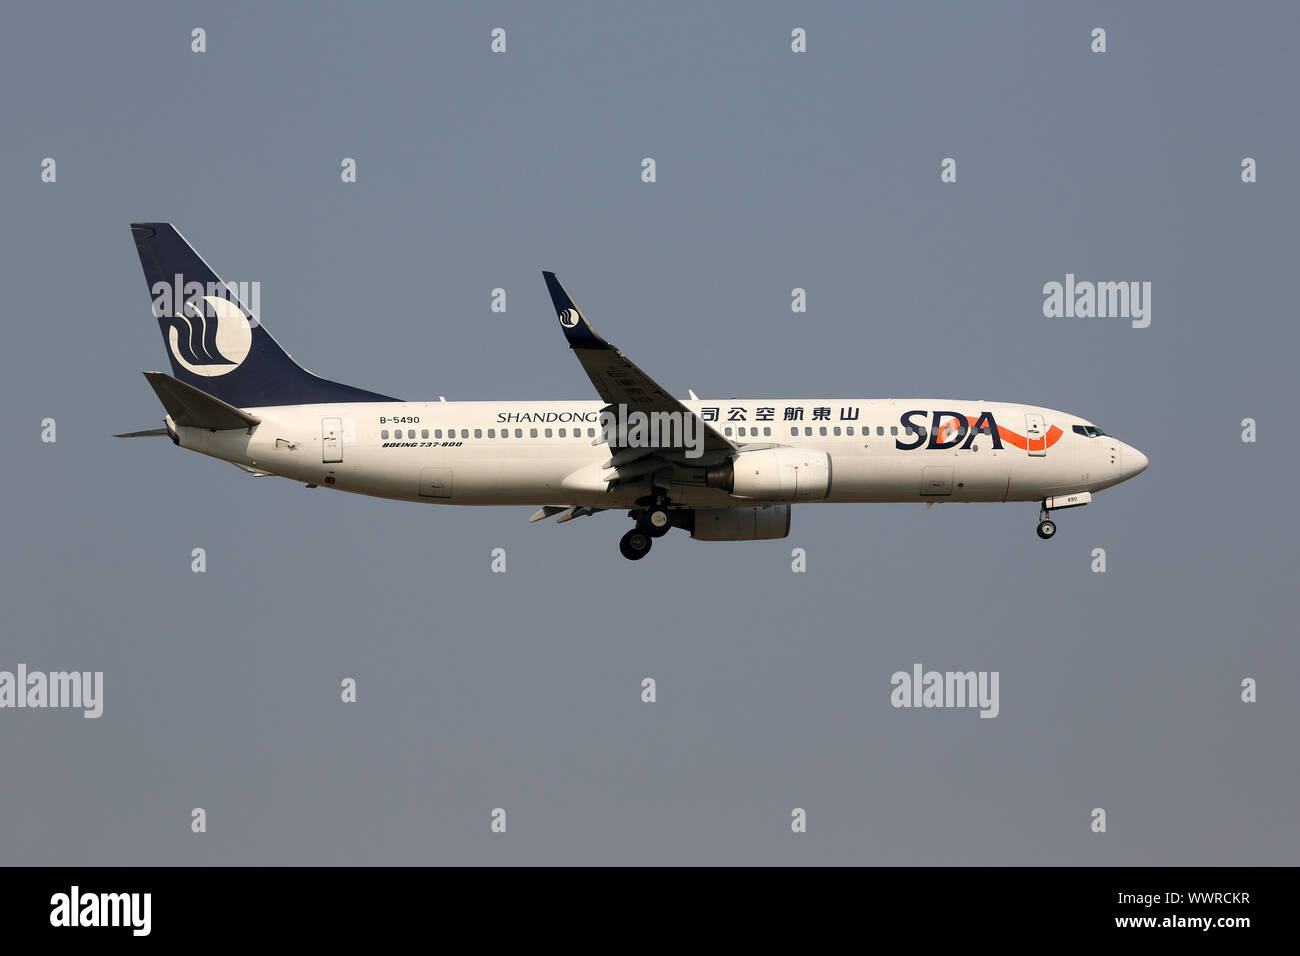 SDA Shandong Airlines Aircraft Boeing 737-800 Stock Photo